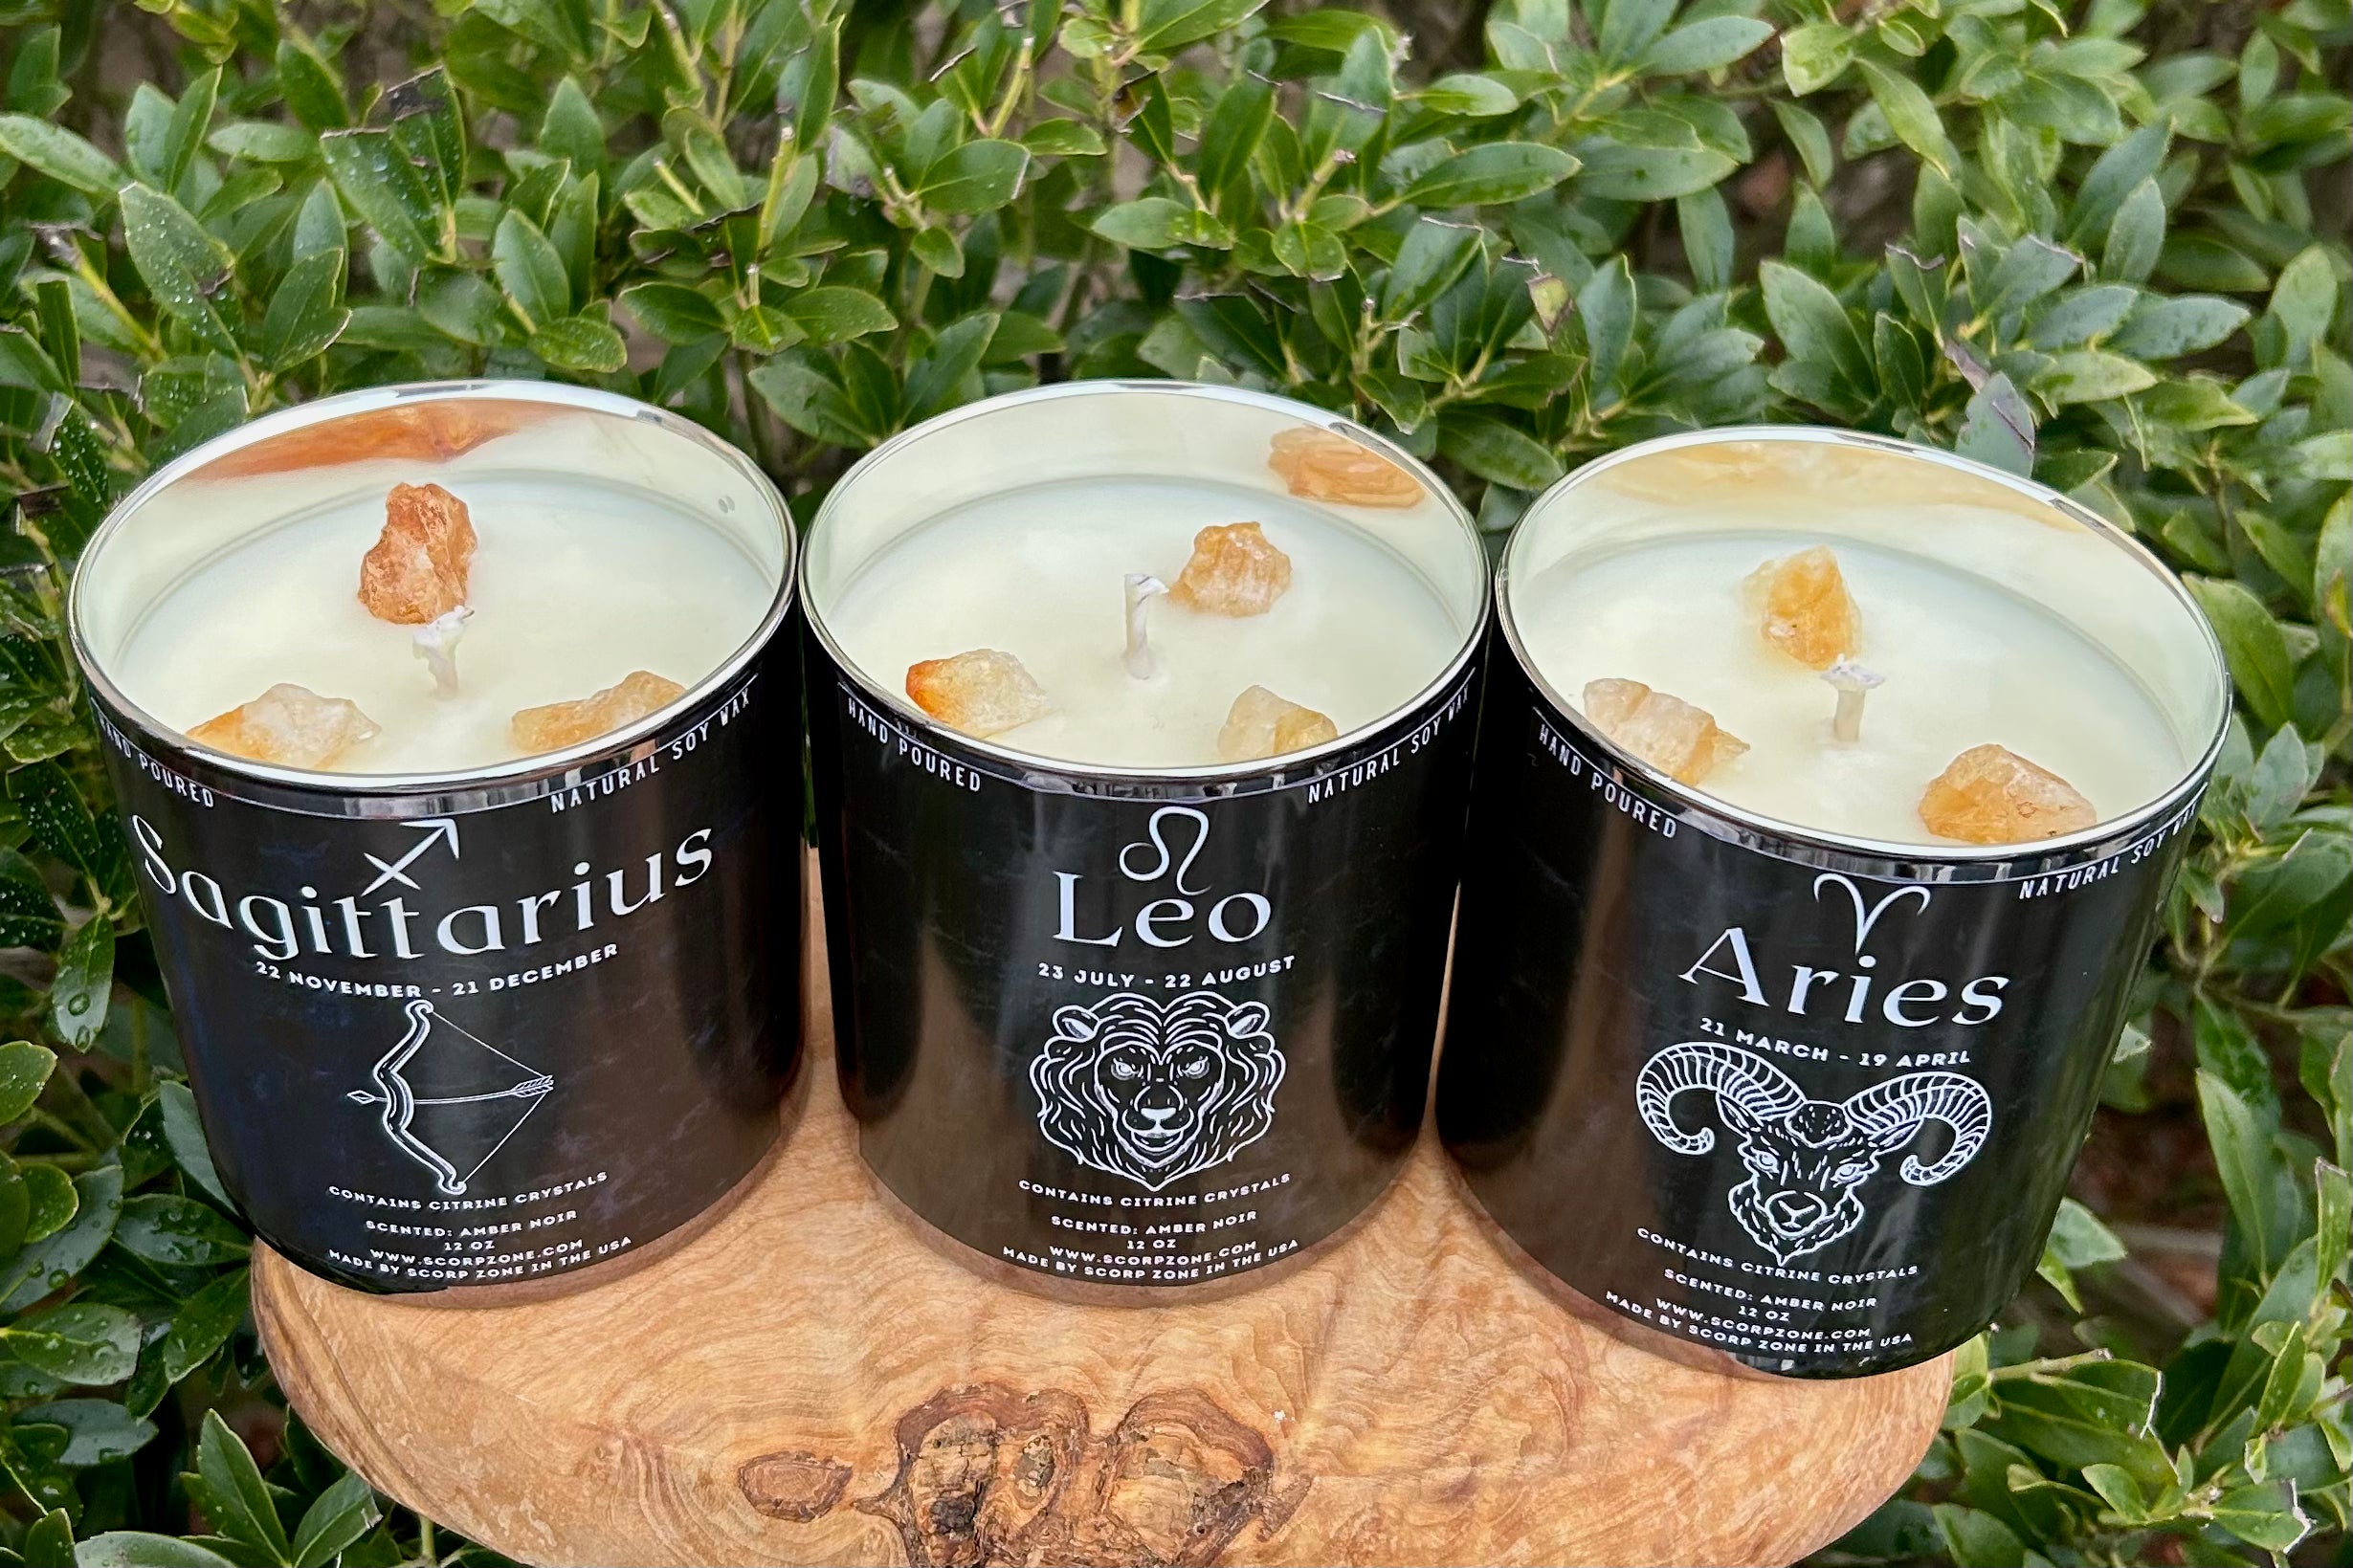 Zodiac Natural Soy Wax Candle by Scorpzone